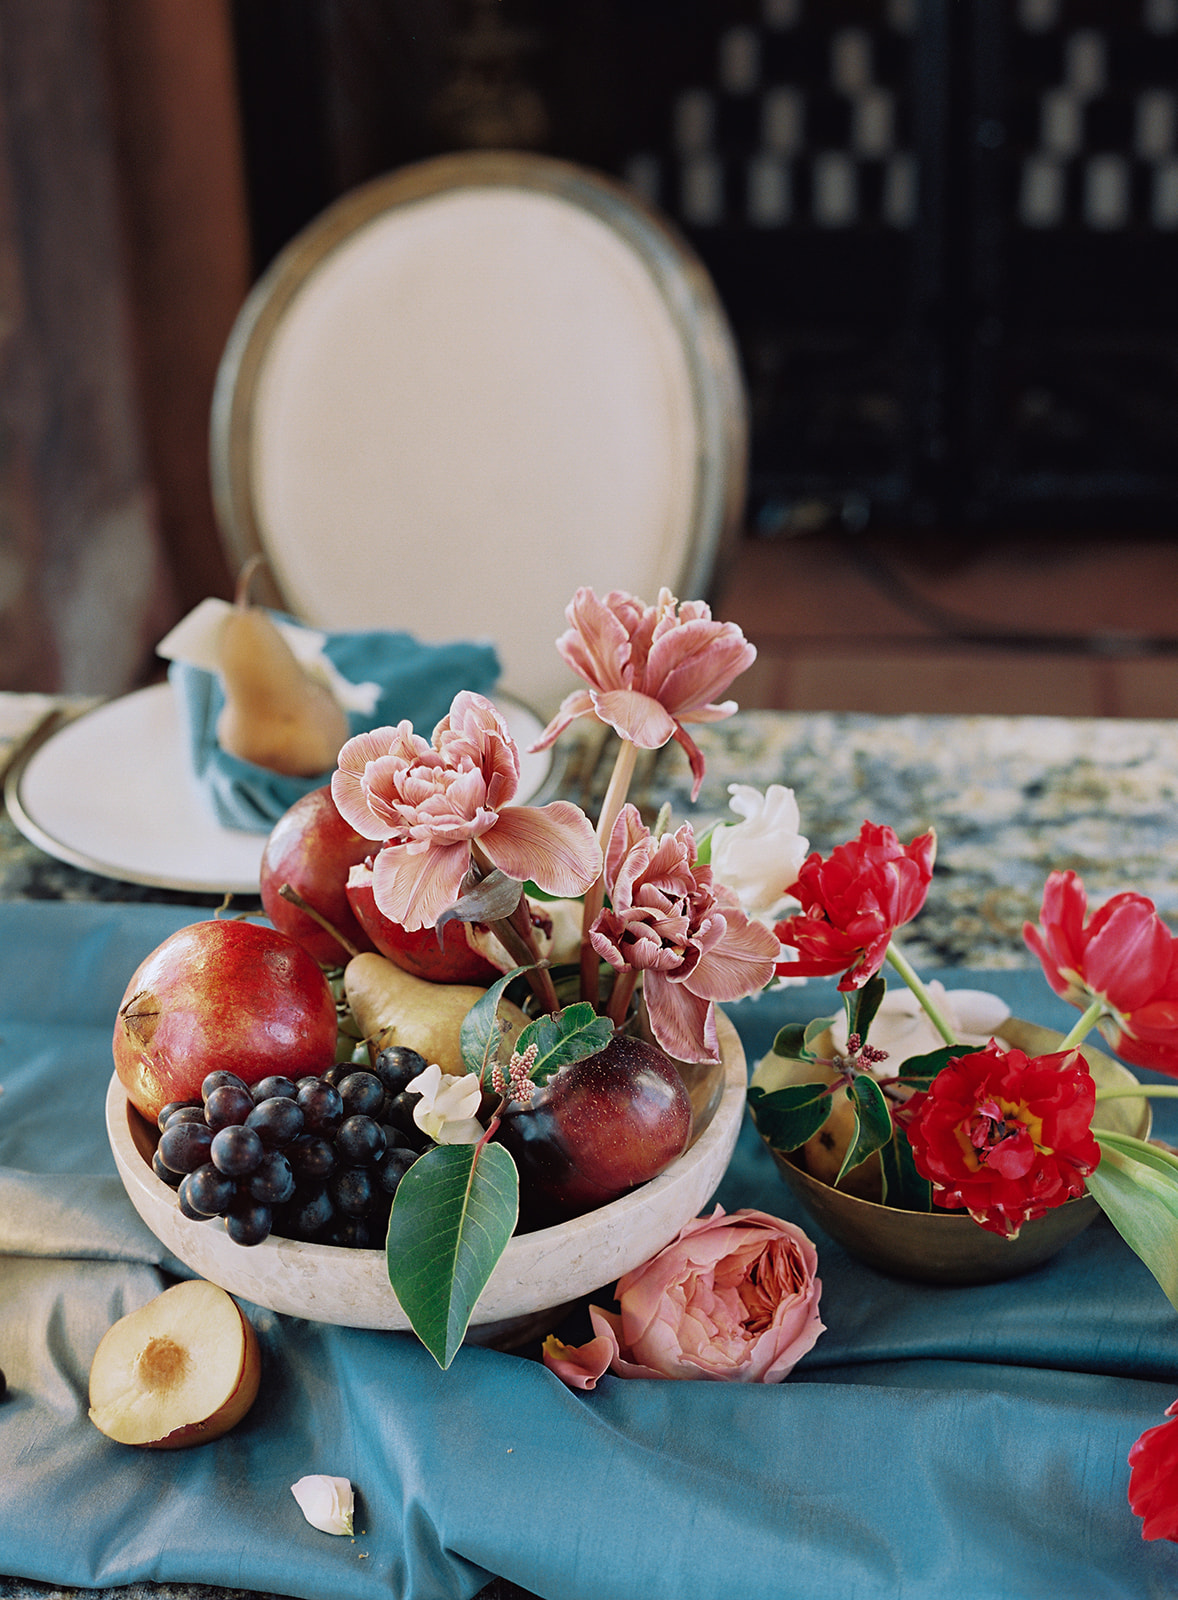 Wedding Table with Fruit